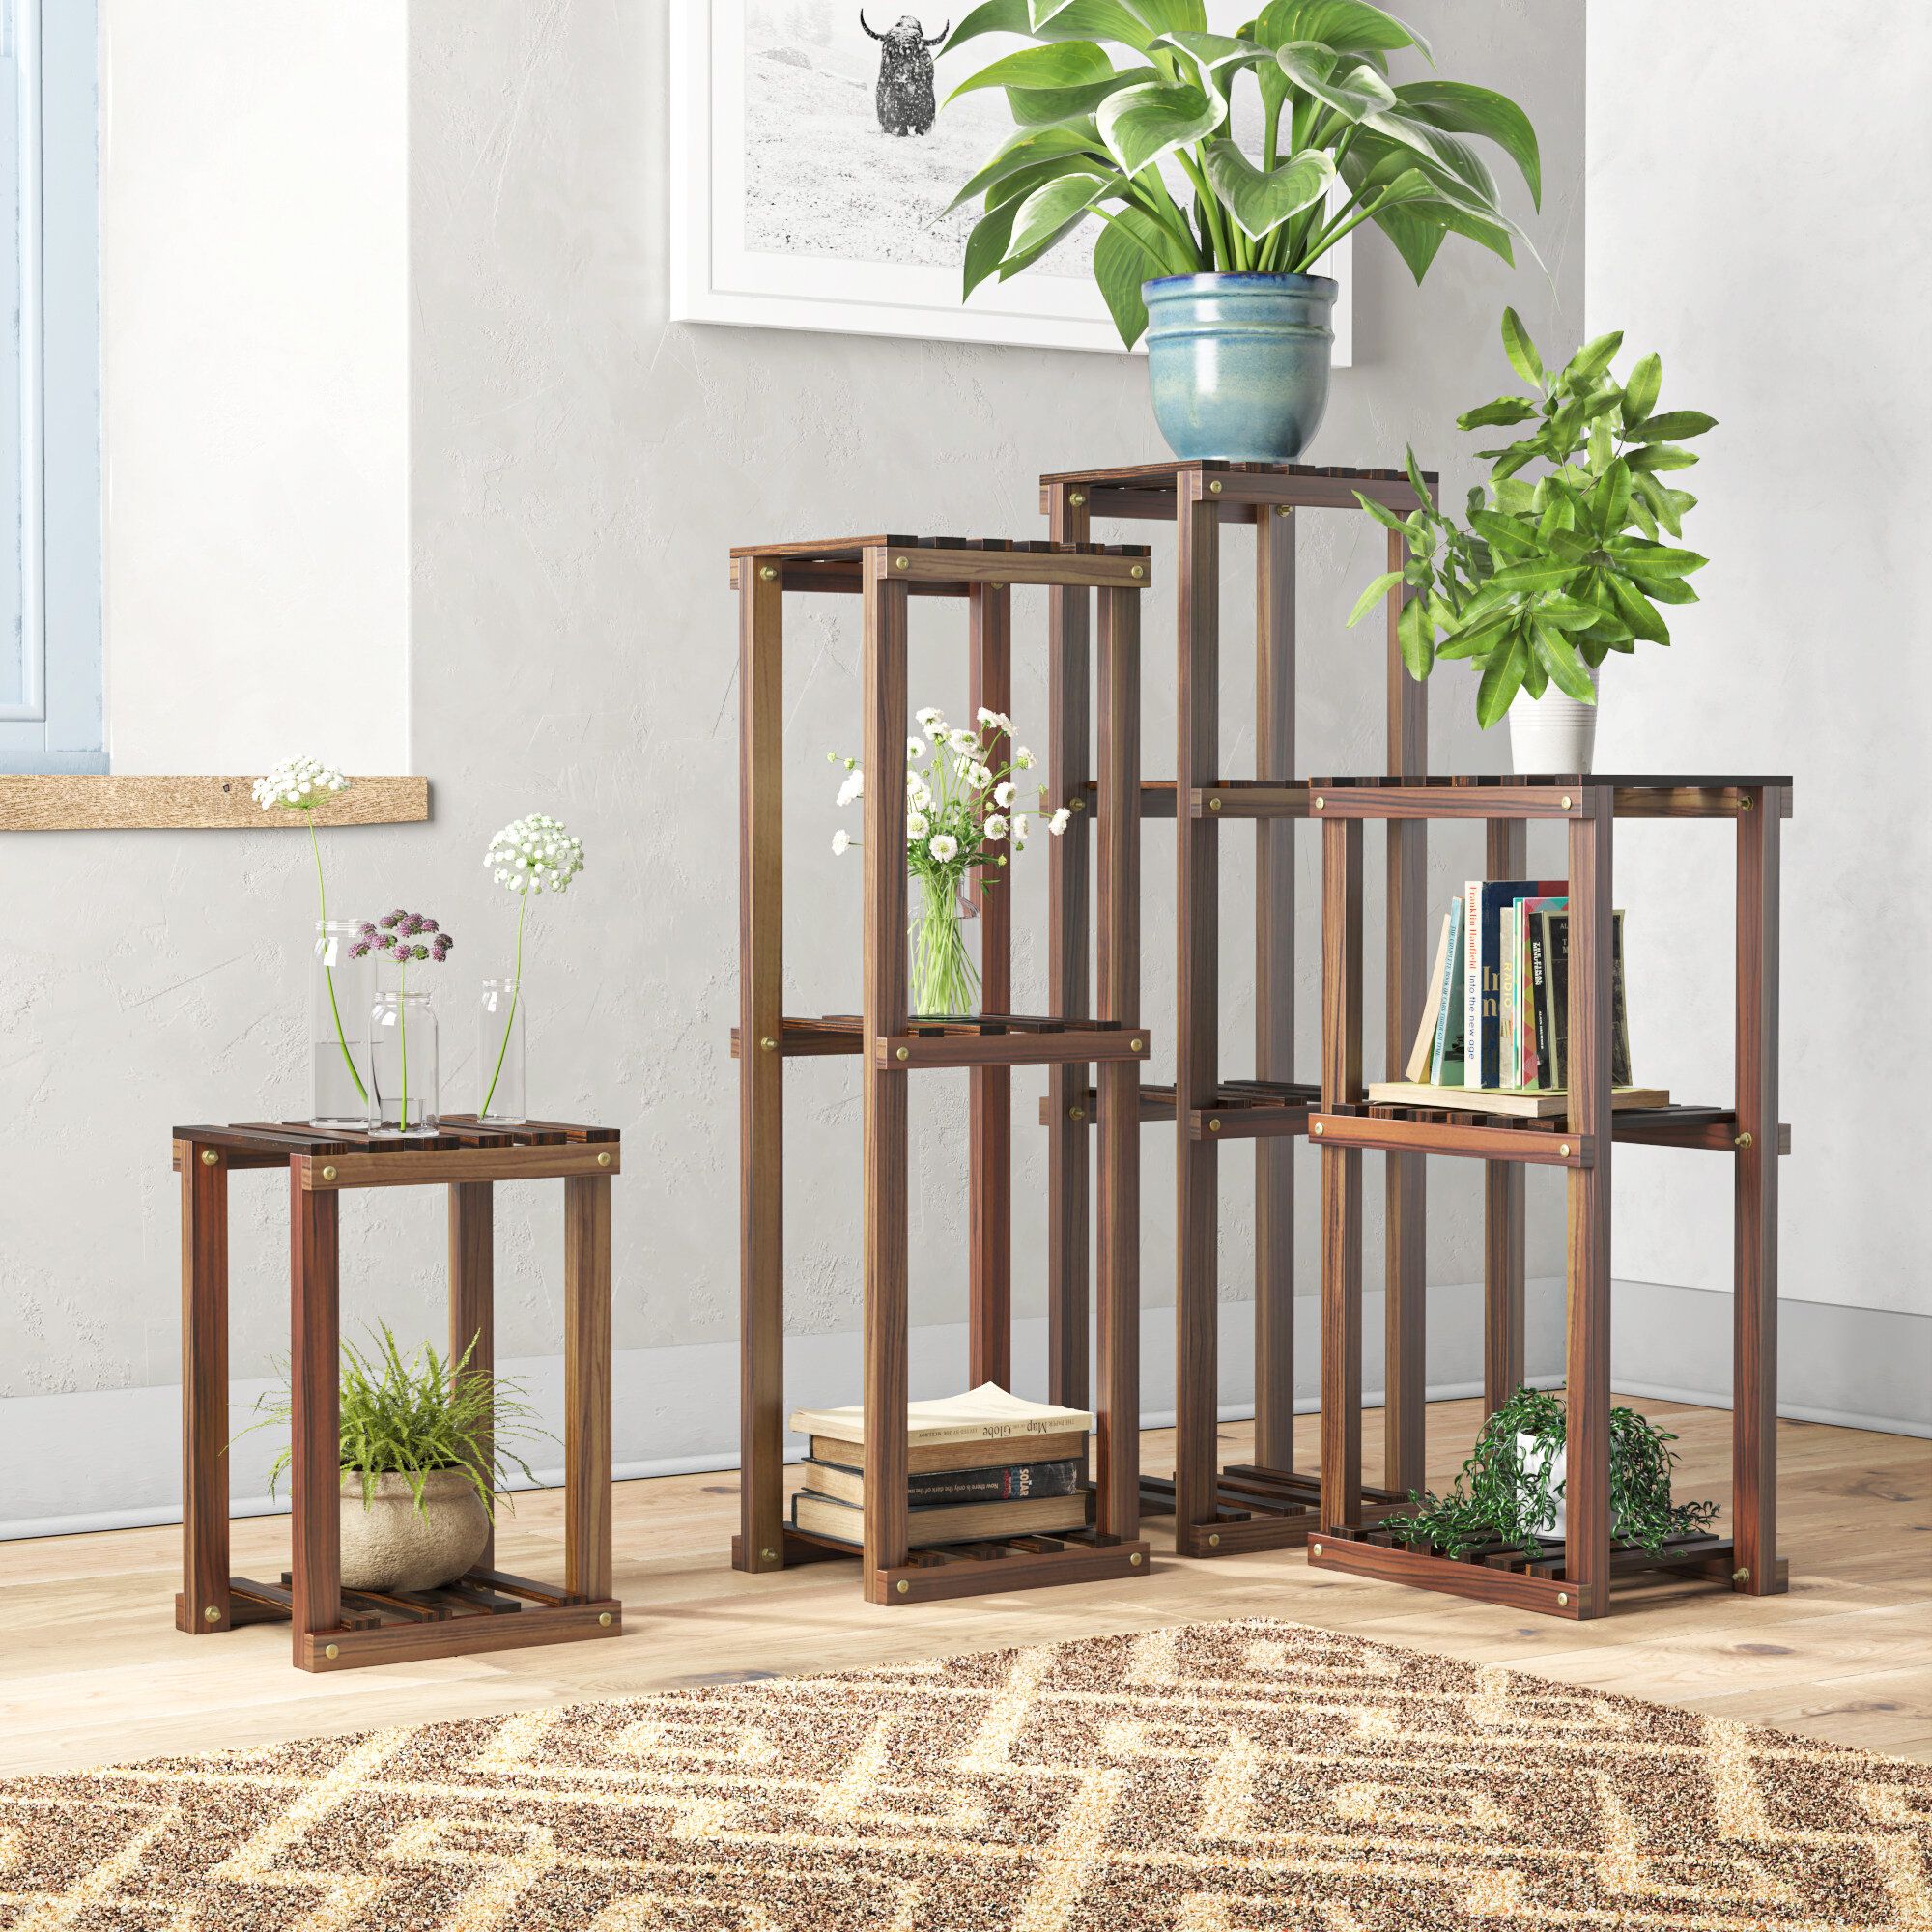 Foundstone™ Joanie Nesting Solid Wood Plant Stand & Reviews | Wayfair Inside Globe Plant Stands (View 6 of 15)